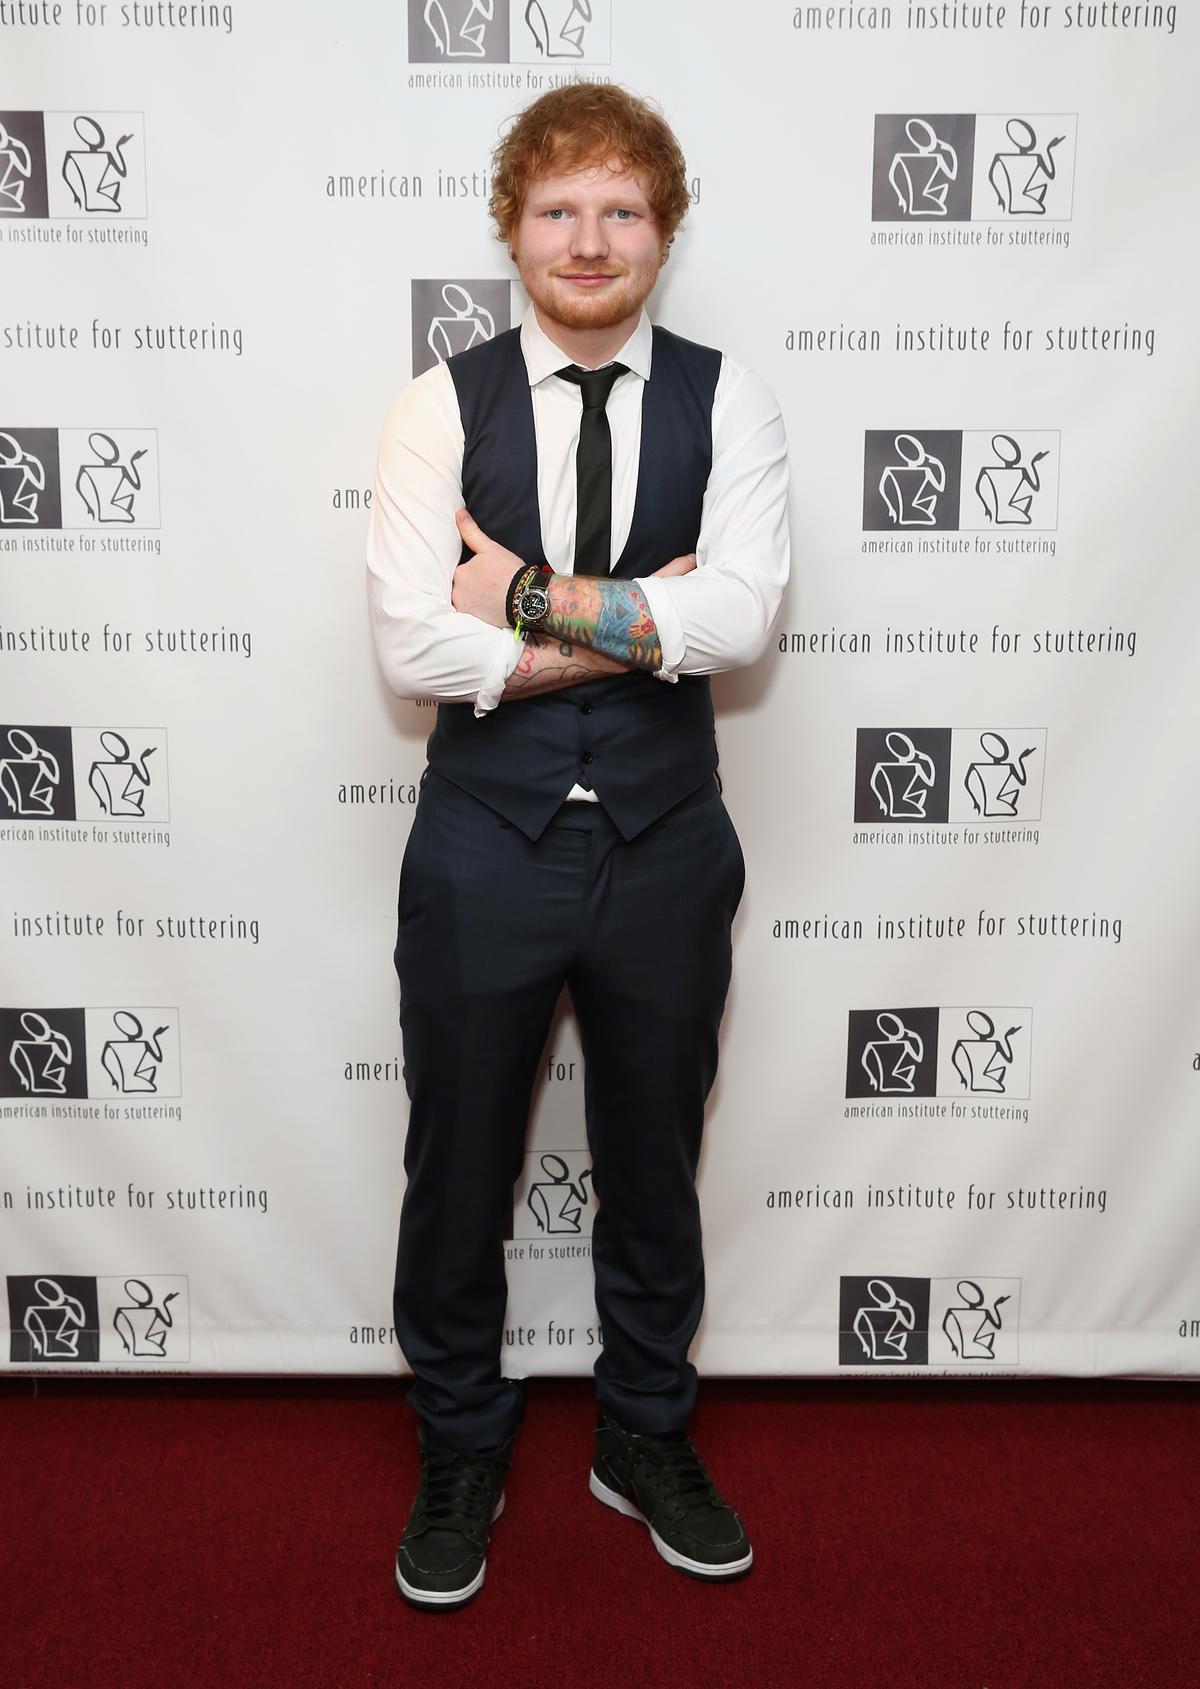 Sheeran attends the 9th Annual American Institute for Stuttering Freeing Voices Changing Lives Gala on June 8, 2015, in New York City. (Cindy Ord/Getty Images)